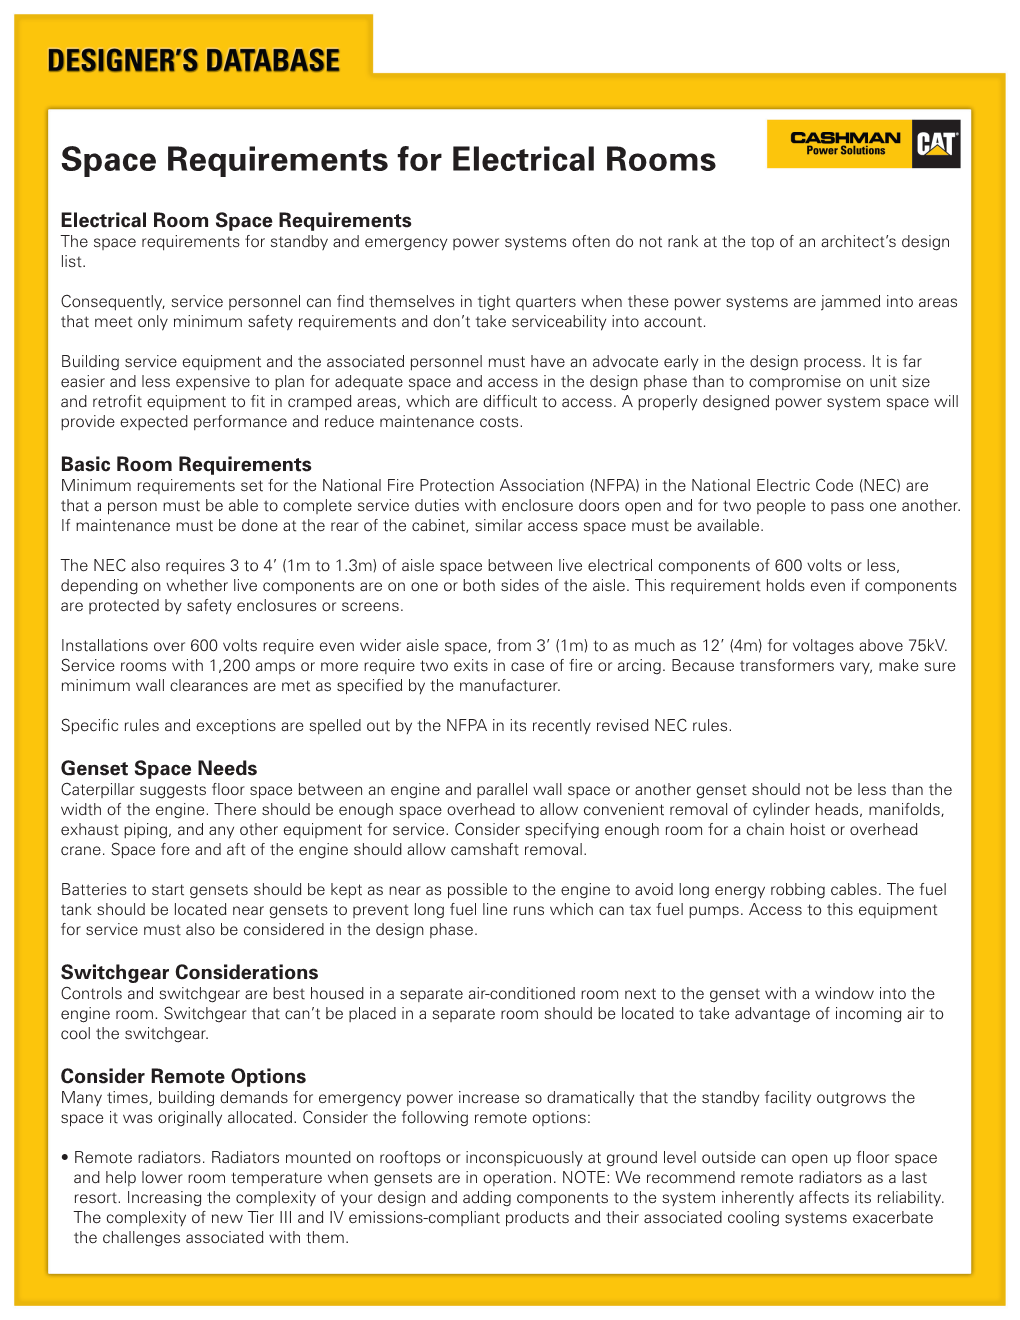 Space Requirements for Electrical Rooms